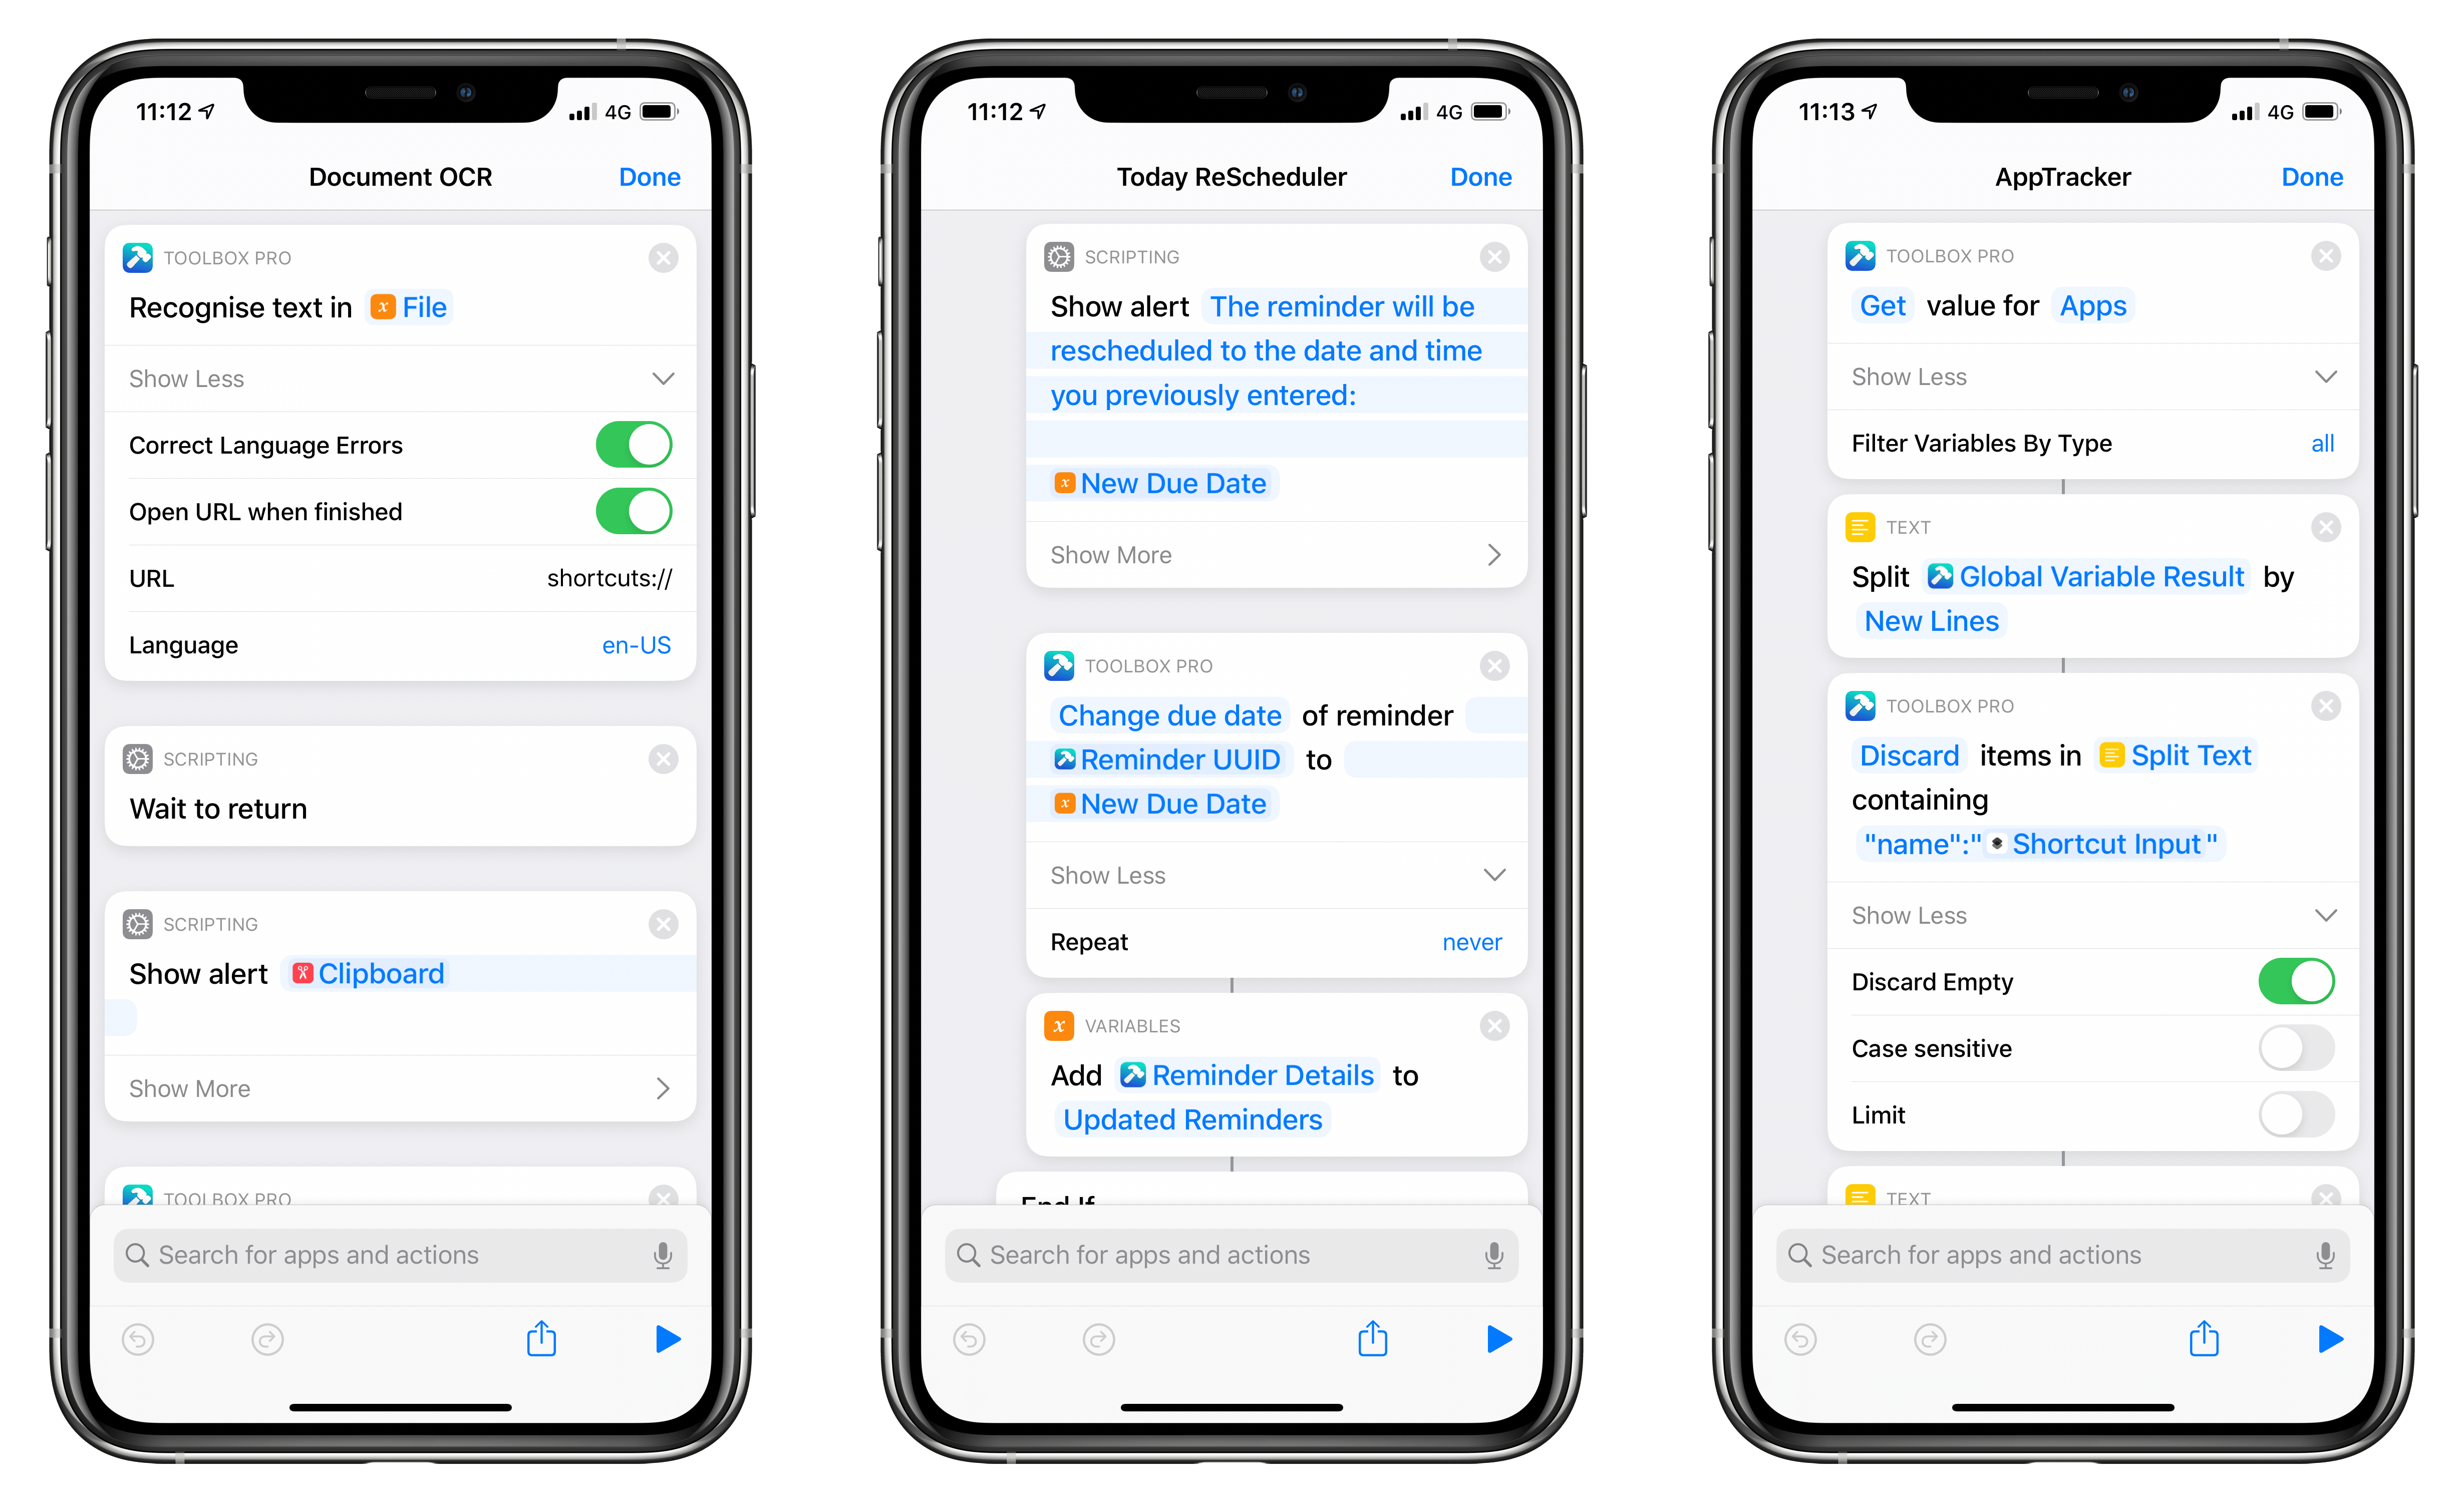 Examples of Toolbox Pro actions in Shortcuts.